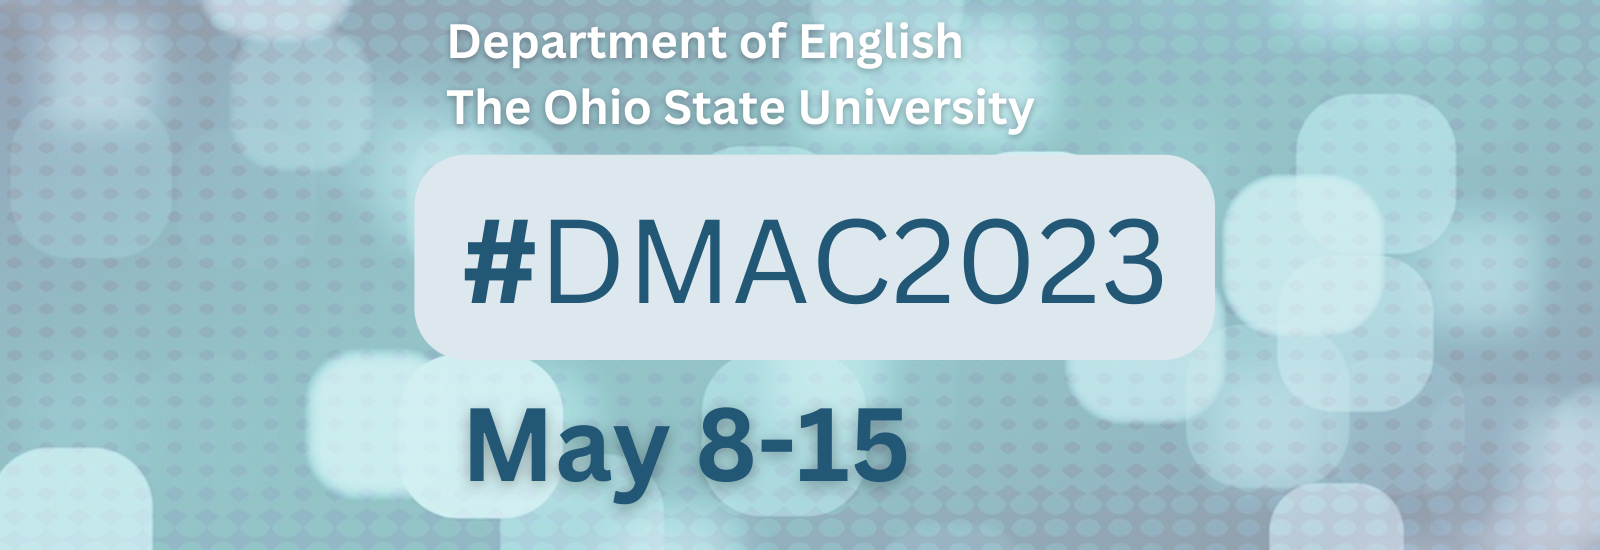 Department of English; The Ohio State University; #DMAC2023; May 8-15